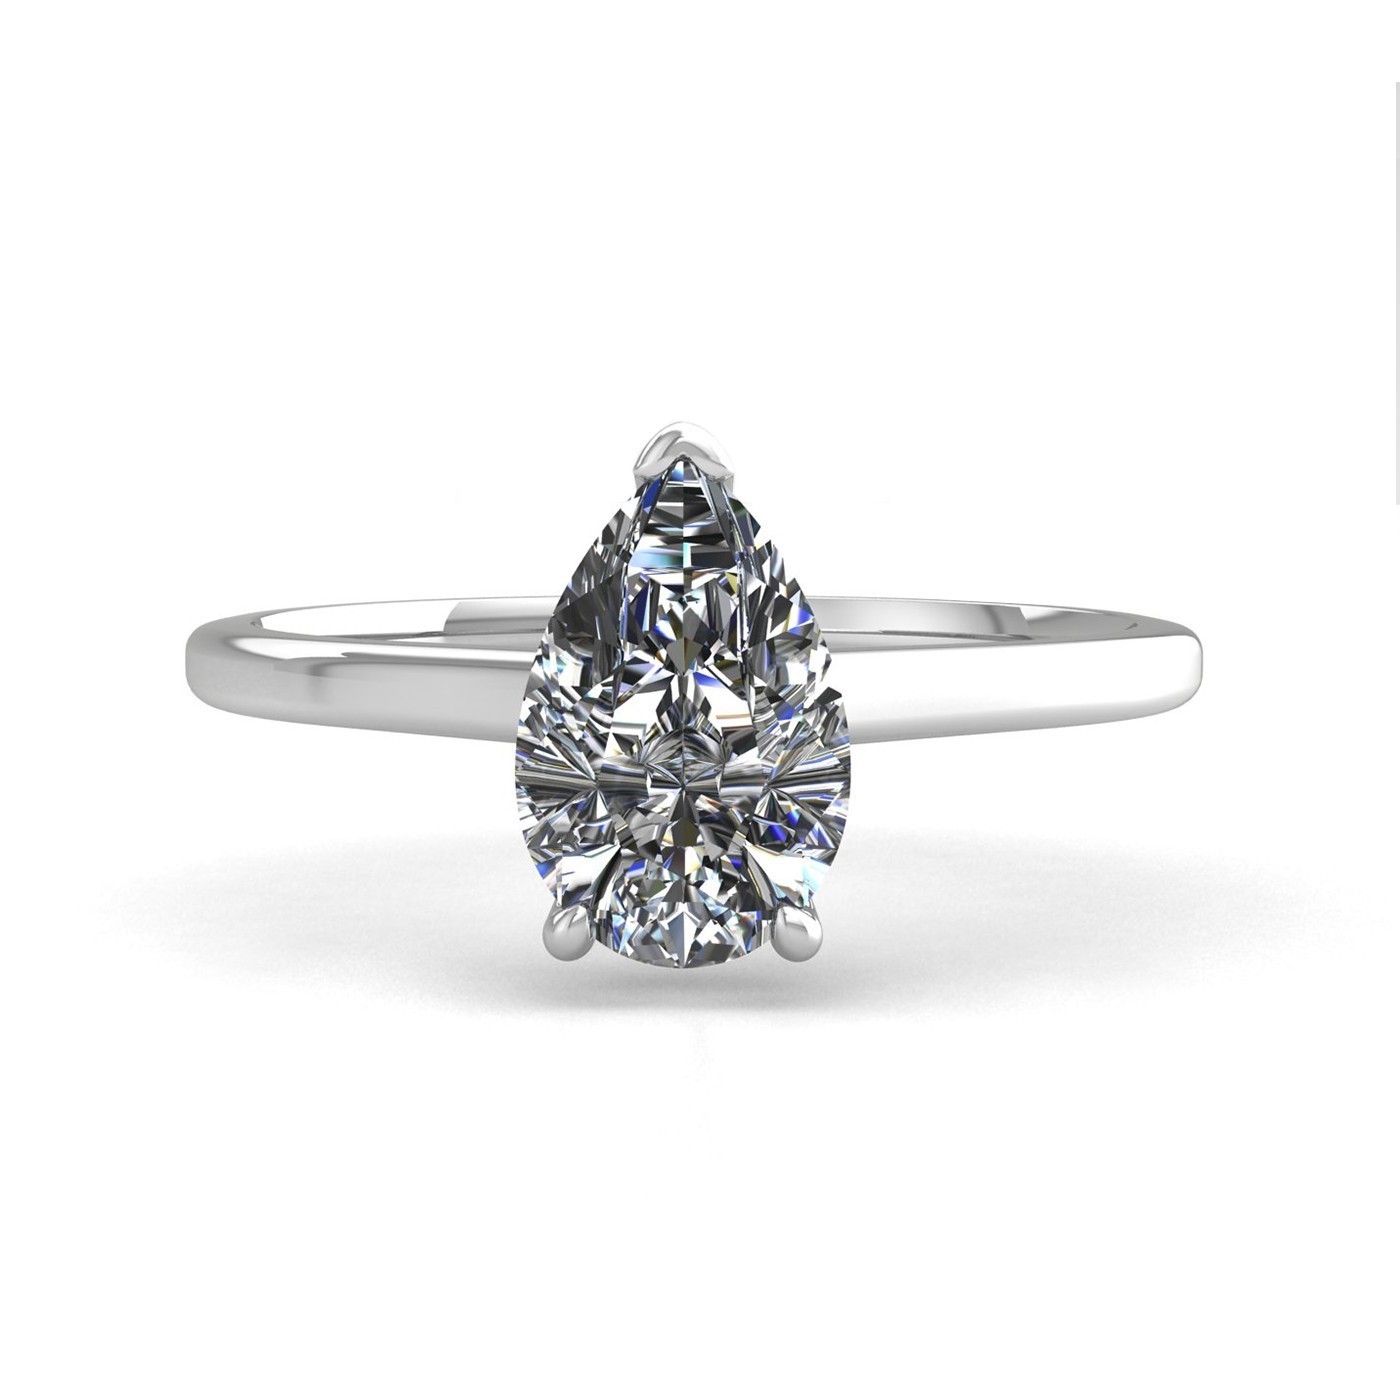 18K WHITE GOLD 3 PRONGS SOLITAIRE PEAR CUT DIAMOND ENGAGEMENT RING WITH WHISPER THIN BAND